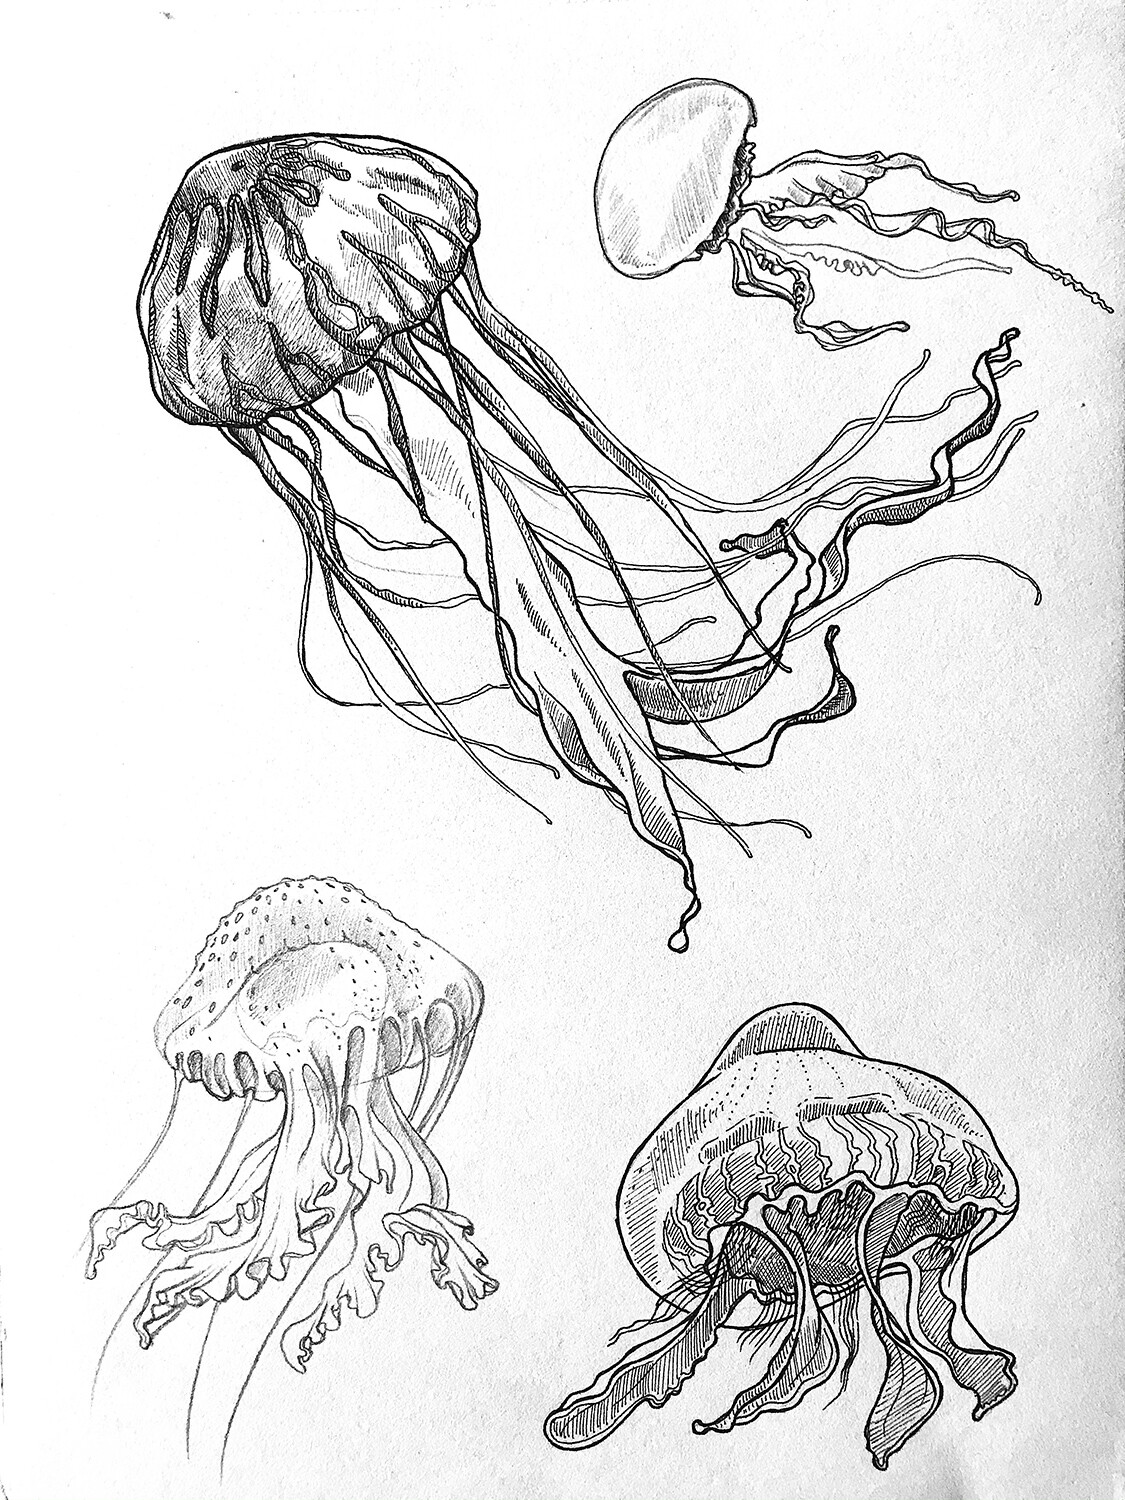 Jelly Fish sketches